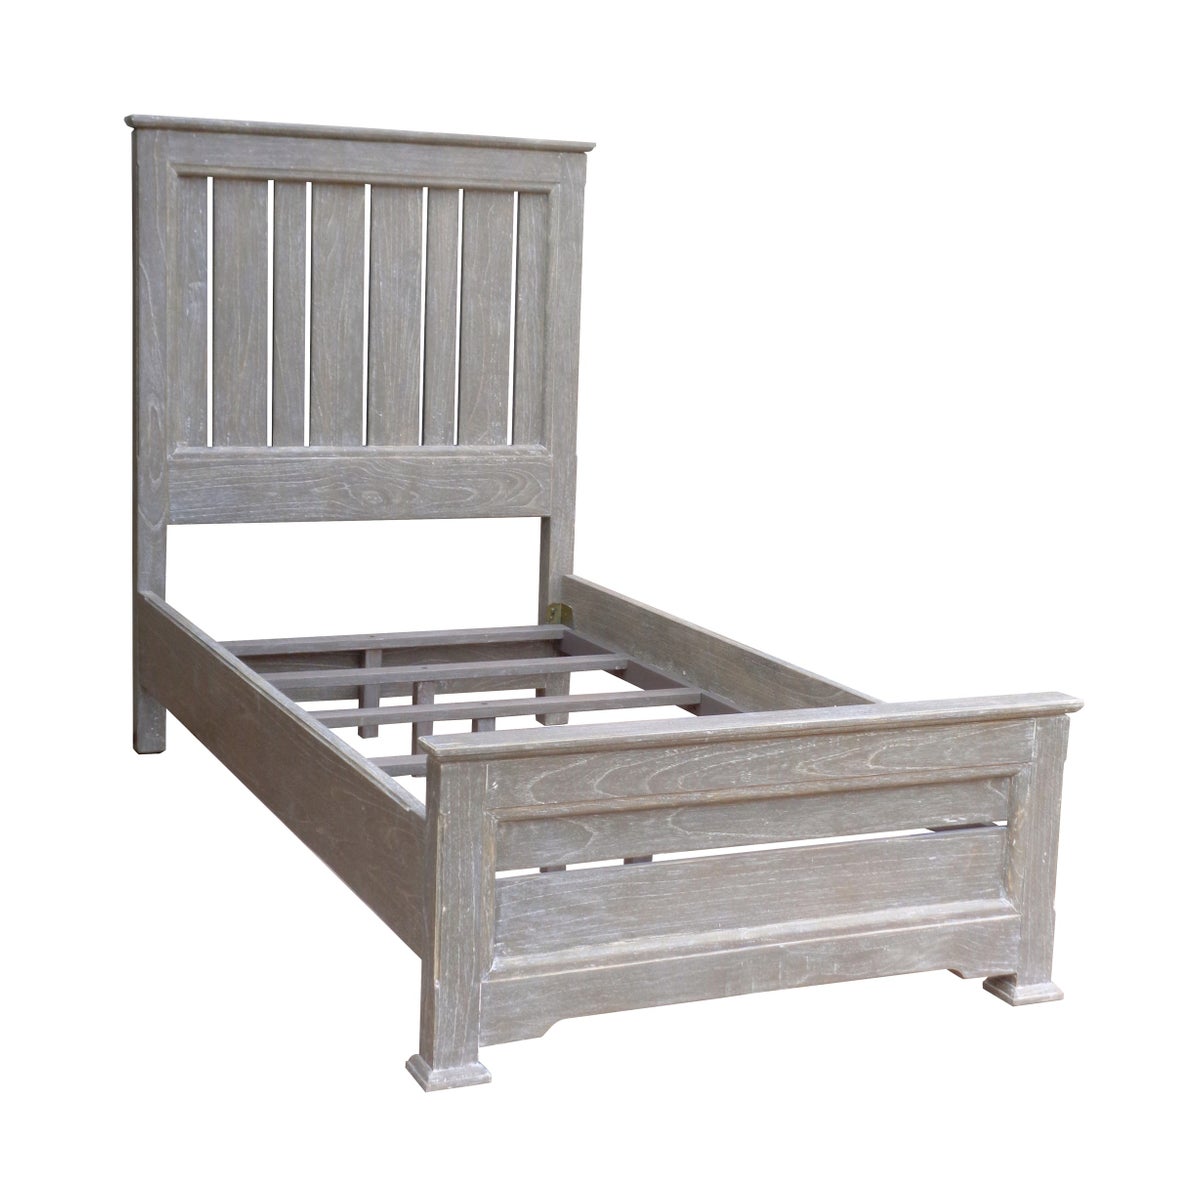 COTTAGE TWIN BED - RW+